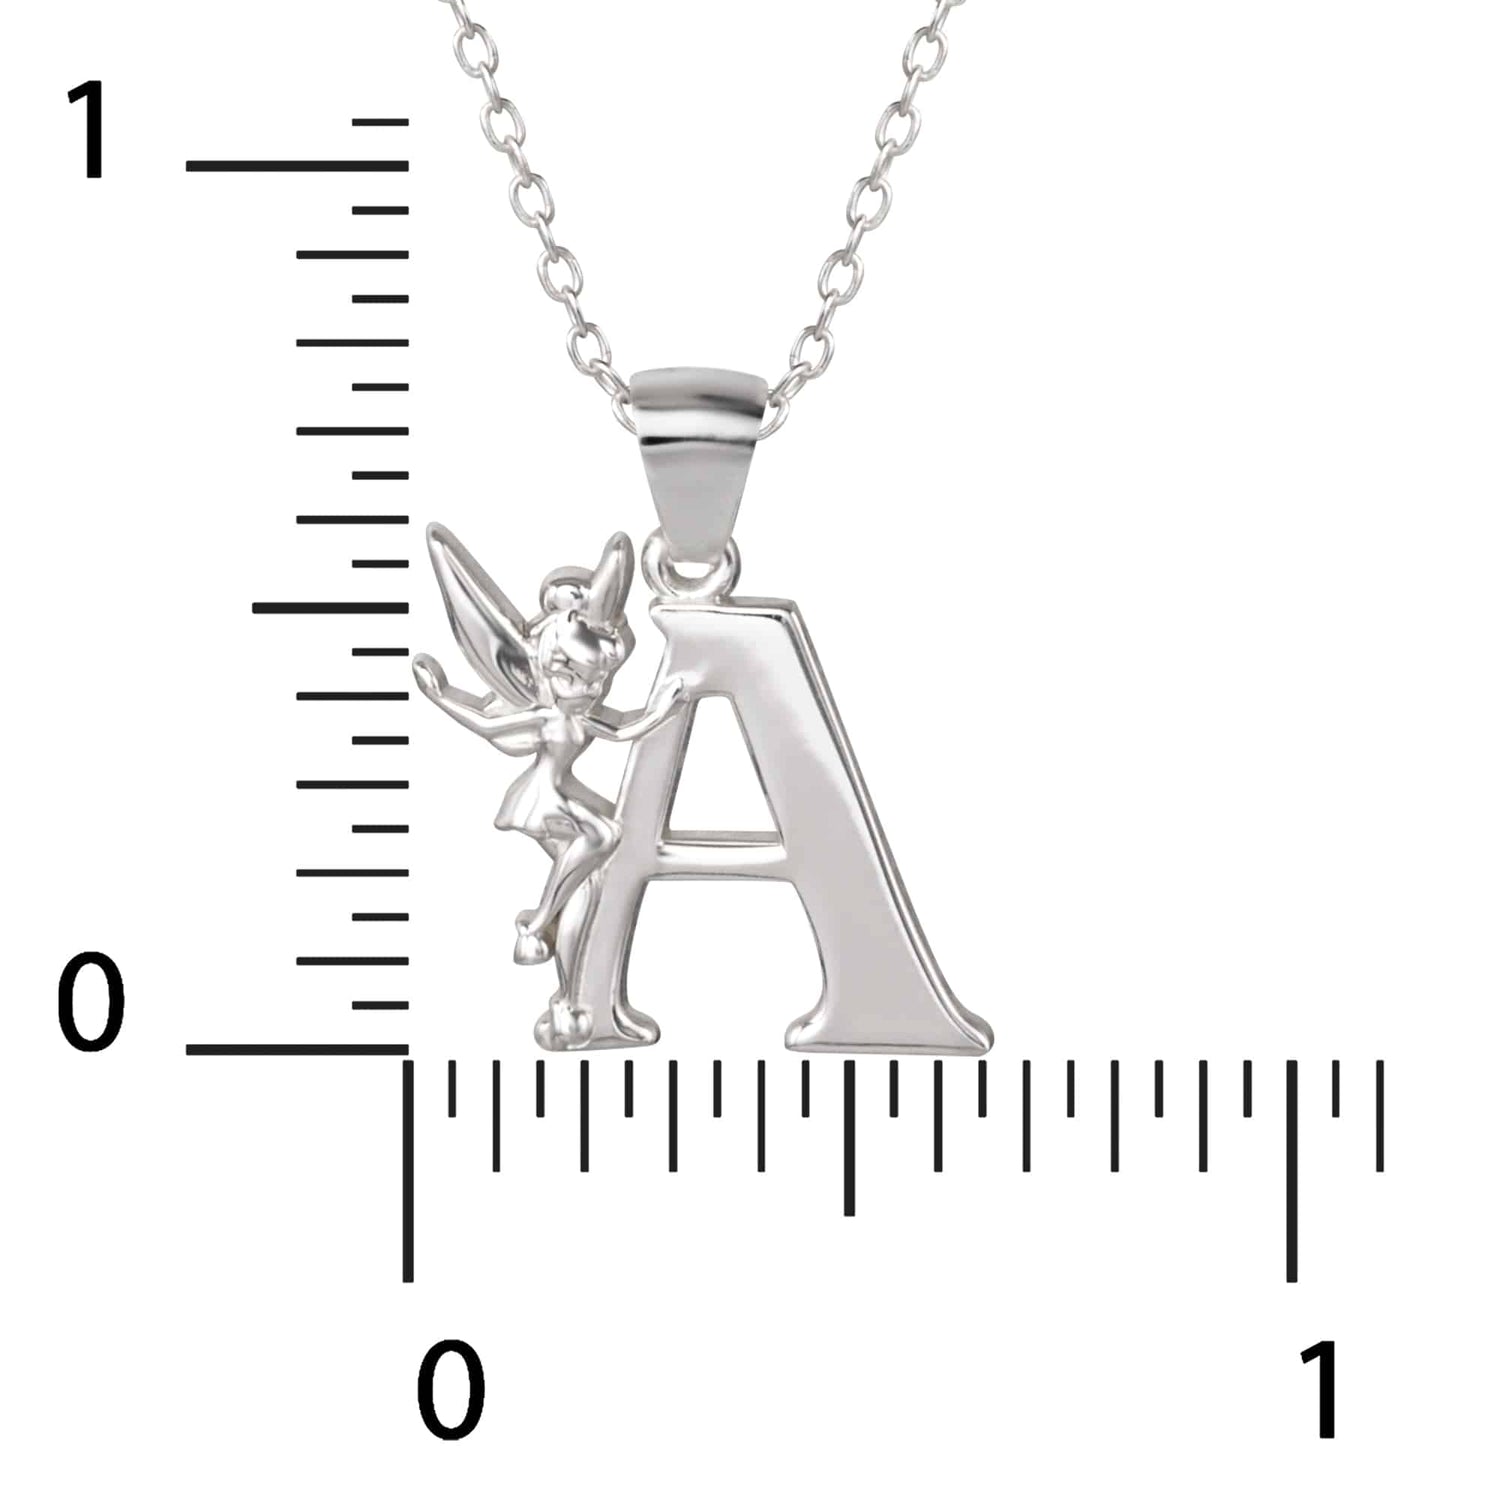 Disney Tinkerbell V initial Silver Pendant Necklace